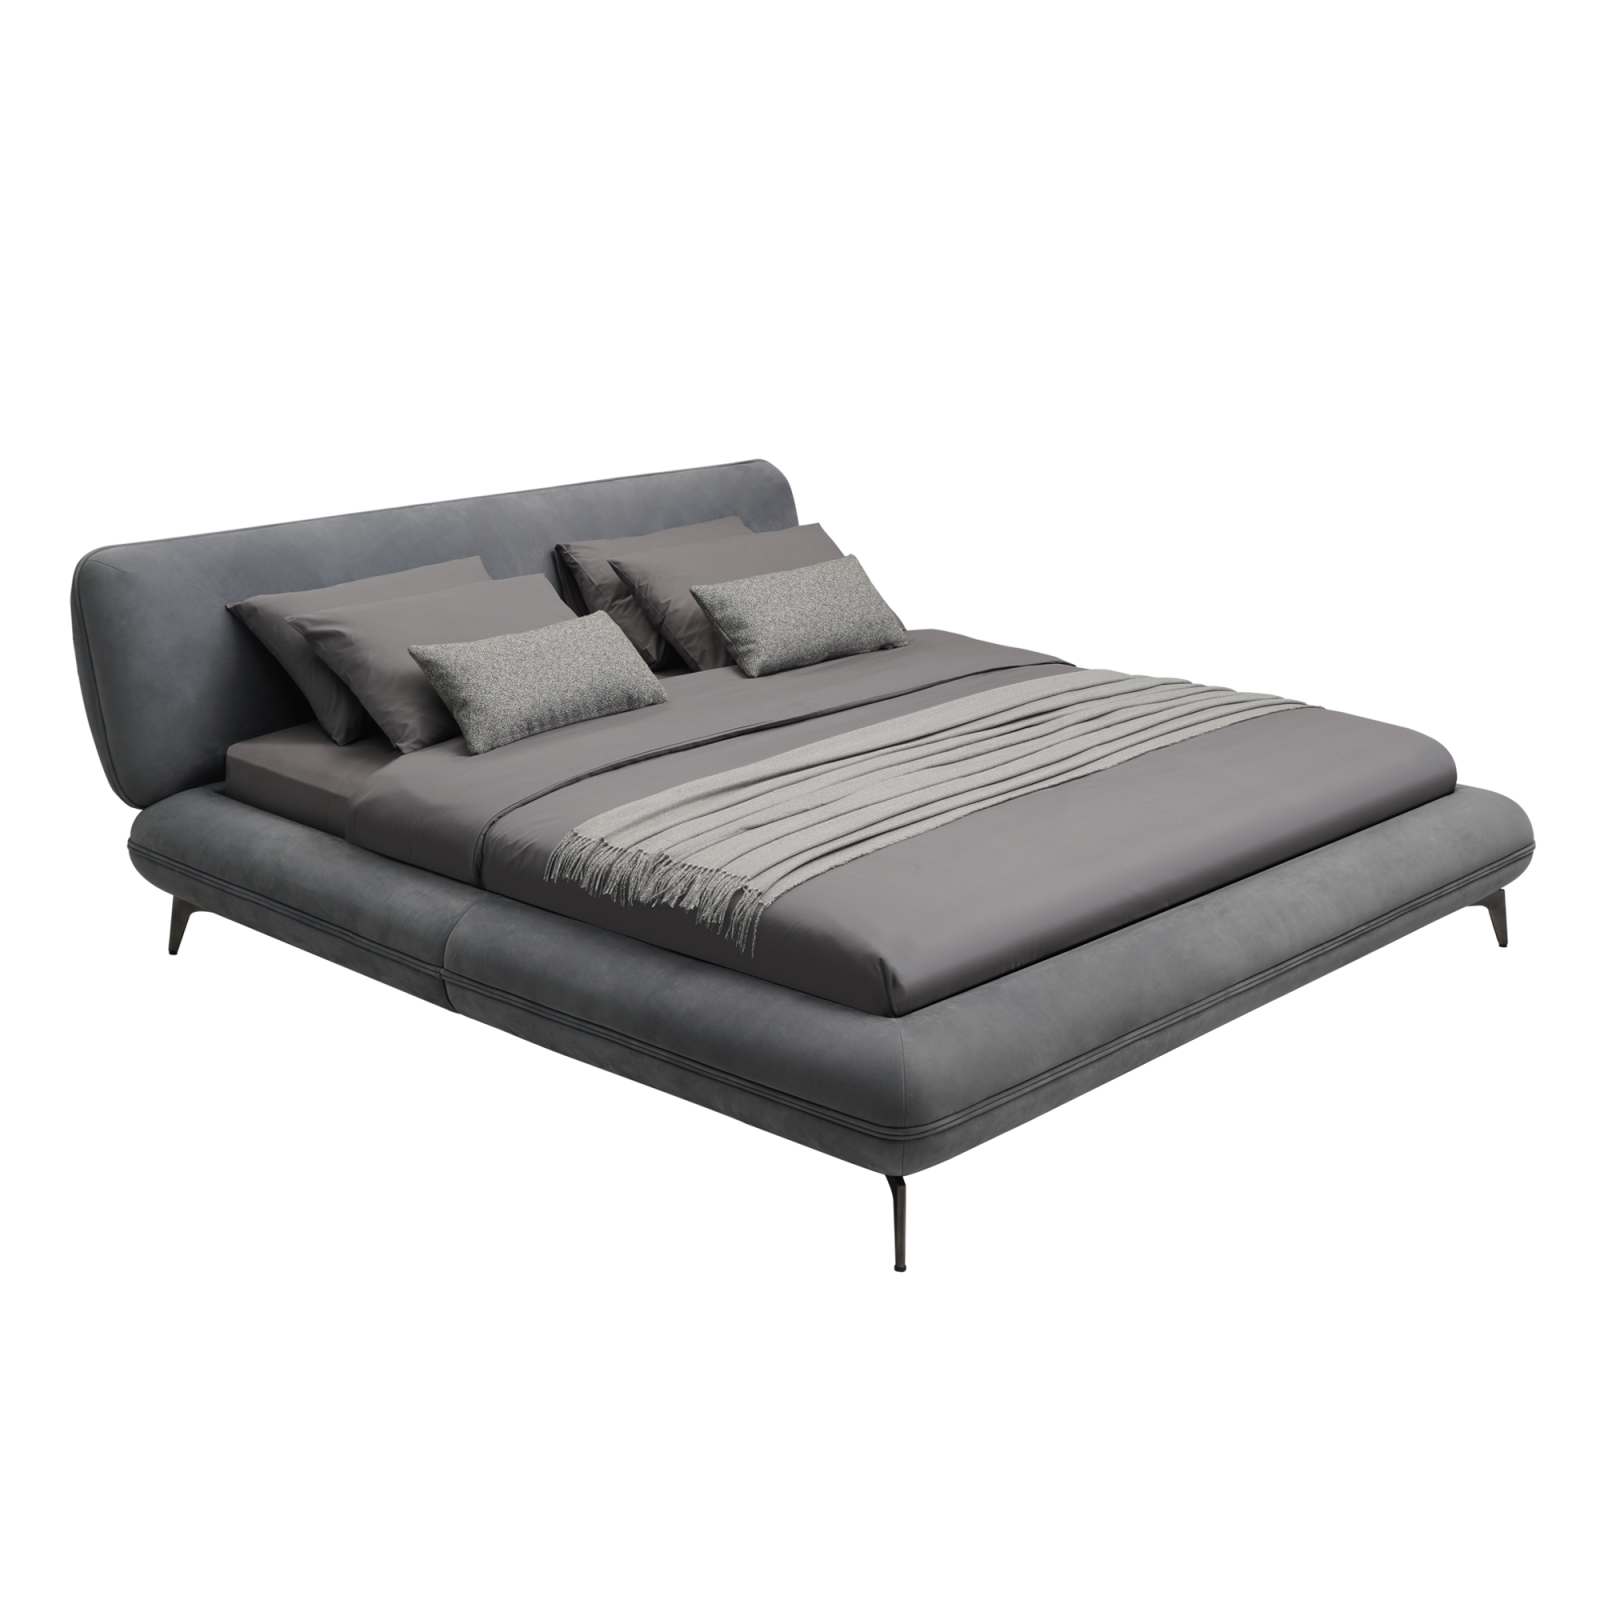 Leather upholstery grey Stone Bed